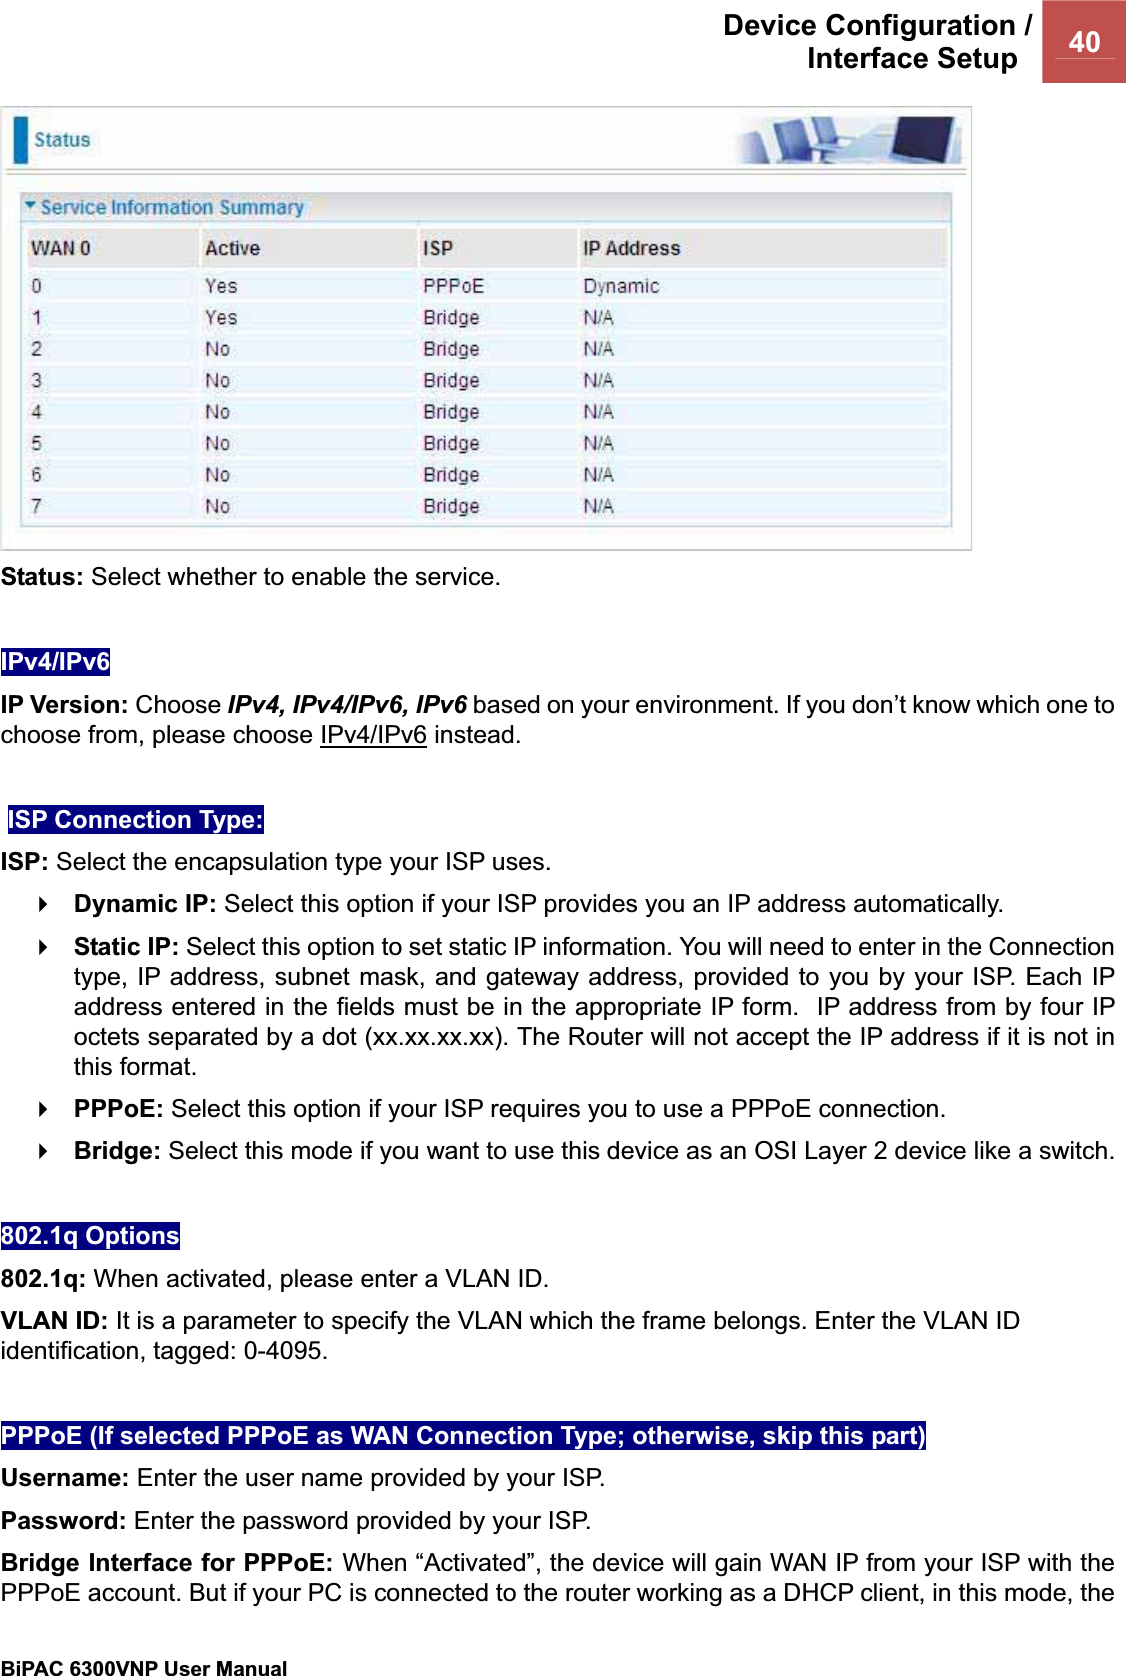 Device Configuration /Interface Setup  40BiPAC 6300VNP User Manual                                               Status: Select whether to enable the service. IPv4/IPv6IP Version: Choose IPv4, IPv4/IPv6, IPv6 based on your environment. If you don’t know which one to choose from, please choose IPv4/IPv6 instead.  ISP Connection Type:  ISP: Select the encapsulation type your ISP uses.  Dynamic IP: Select this option if your ISP provides you an IP address automatically.  Static IP: Select this option to set static IP information. You will need to enter in the Connection type, IP address, subnet mask, and gateway address, provided to you by your ISP. Each IP address entered in the fields must be in the appropriate IP form.  IP address from by four IP octets separated by a dot (xx.xx.xx.xx). The Router will not accept the IP address if it is not in this format. PPPoE: Select this option if your ISP requires you to use a PPPoE connection.  Bridge: Select this mode if you want to use this device as an OSI Layer 2 device like a switch. 802.1q Options 802.1q: When activated, please enter a VLAN ID.VLAN ID: It is a parameter to specify the VLAN which the frame belongs. Enter the VLAN ID identification, tagged: 0-4095. PPPoE (If selected PPPoE as WAN Connection Type; otherwise, skip this part)  Username: Enter the user name provided by your ISP.  Password: Enter the password provided by your ISP. Bridge Interface for PPPoE: When “Activated”, the device will gain WAN IP from your ISP with the PPPoE account. But if your PC is connected to the router working as a DHCP client, in this mode, the 